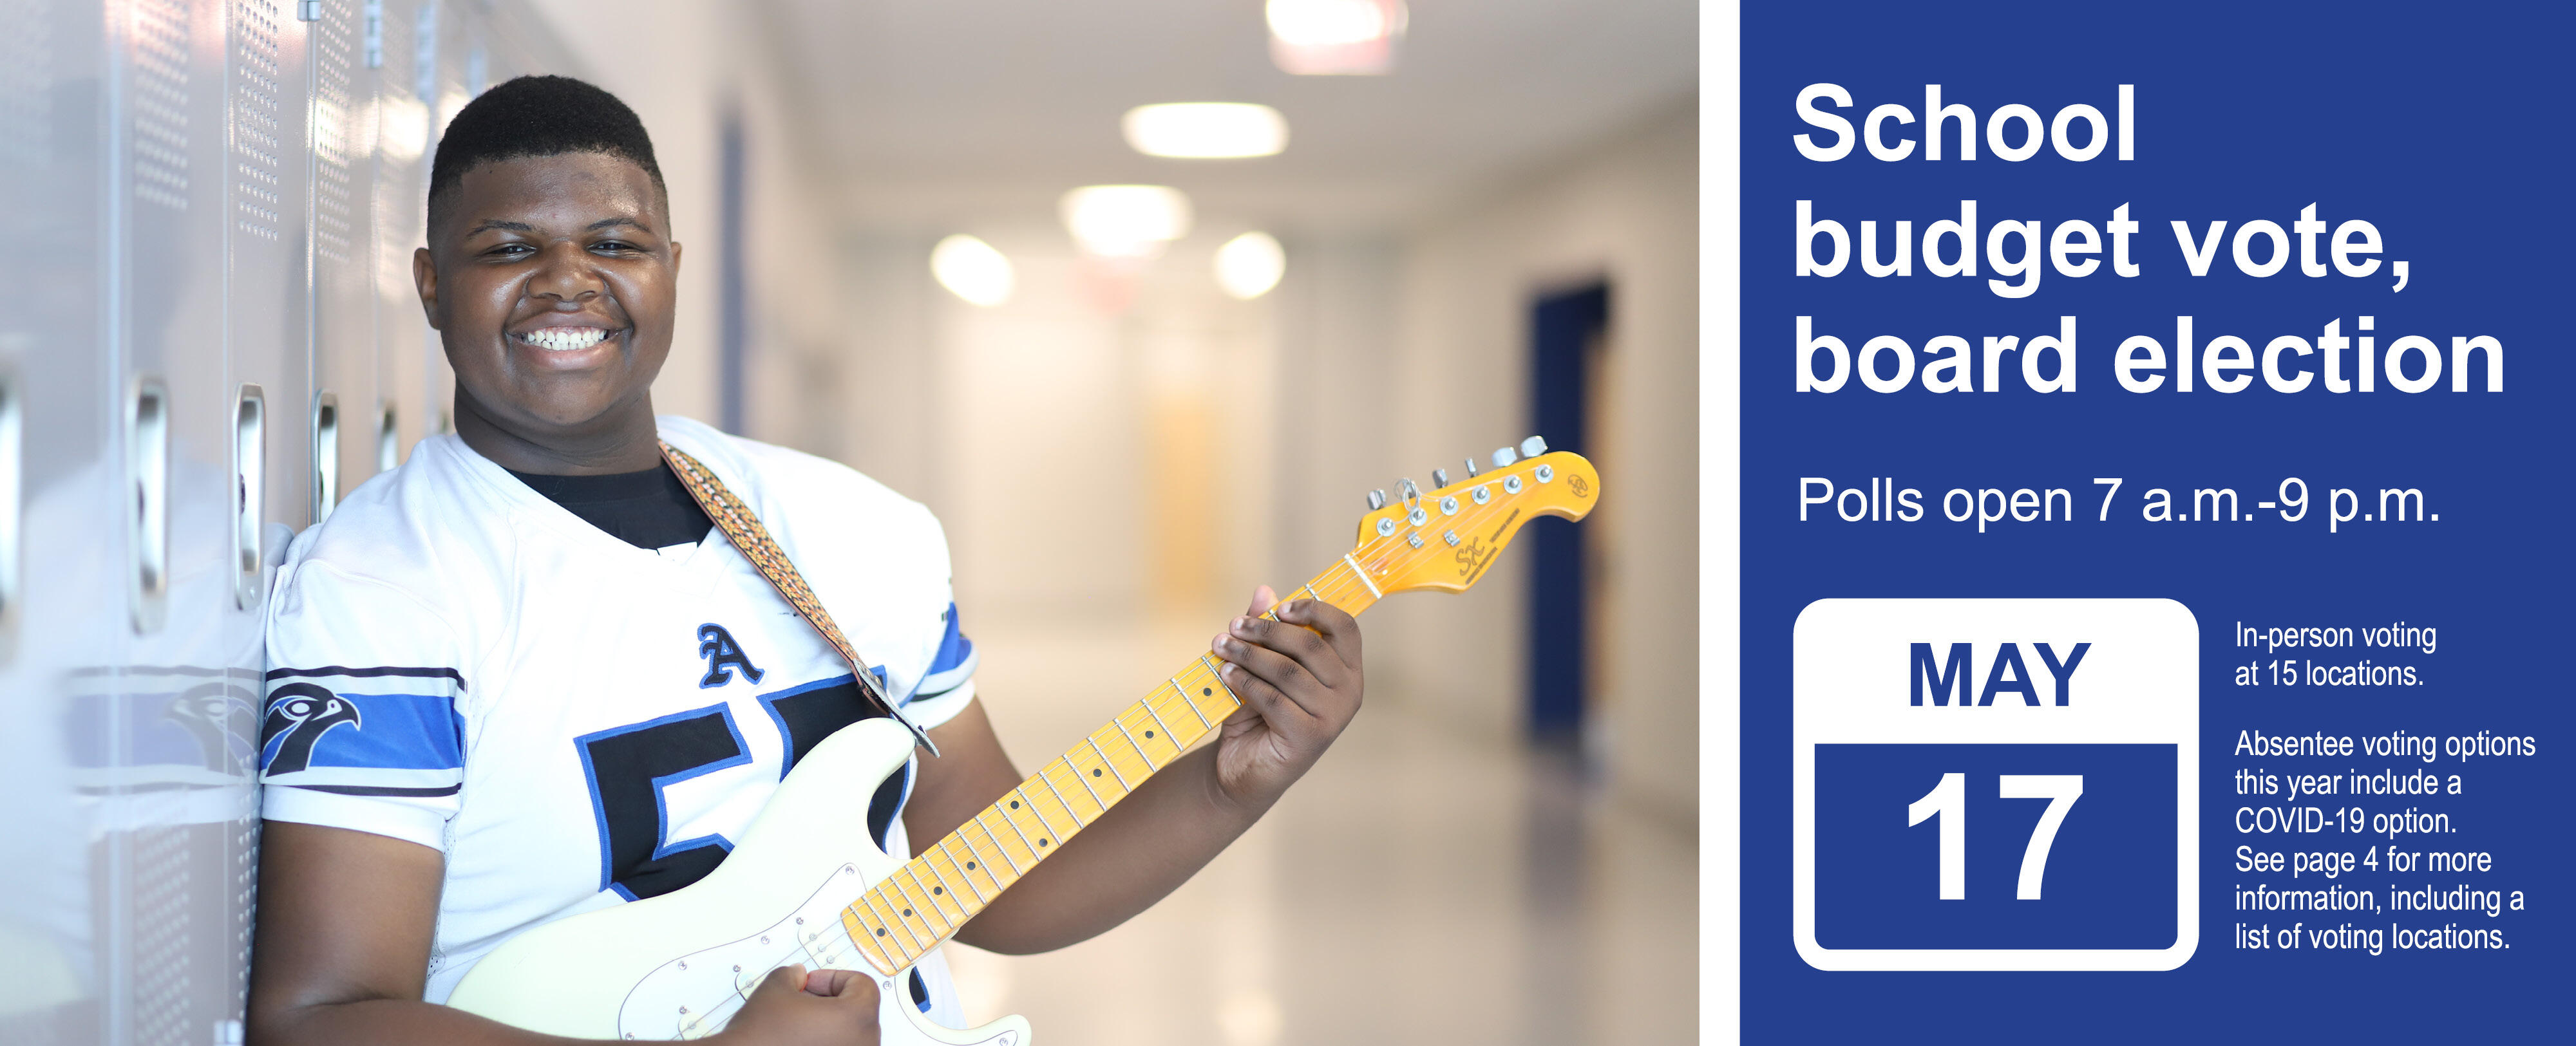 Photo at left of student playing a guitar in the hallways. At right is text that reads: "School  budget vote,  board election May 17, Polls open 7 a.m.-9 p.m."